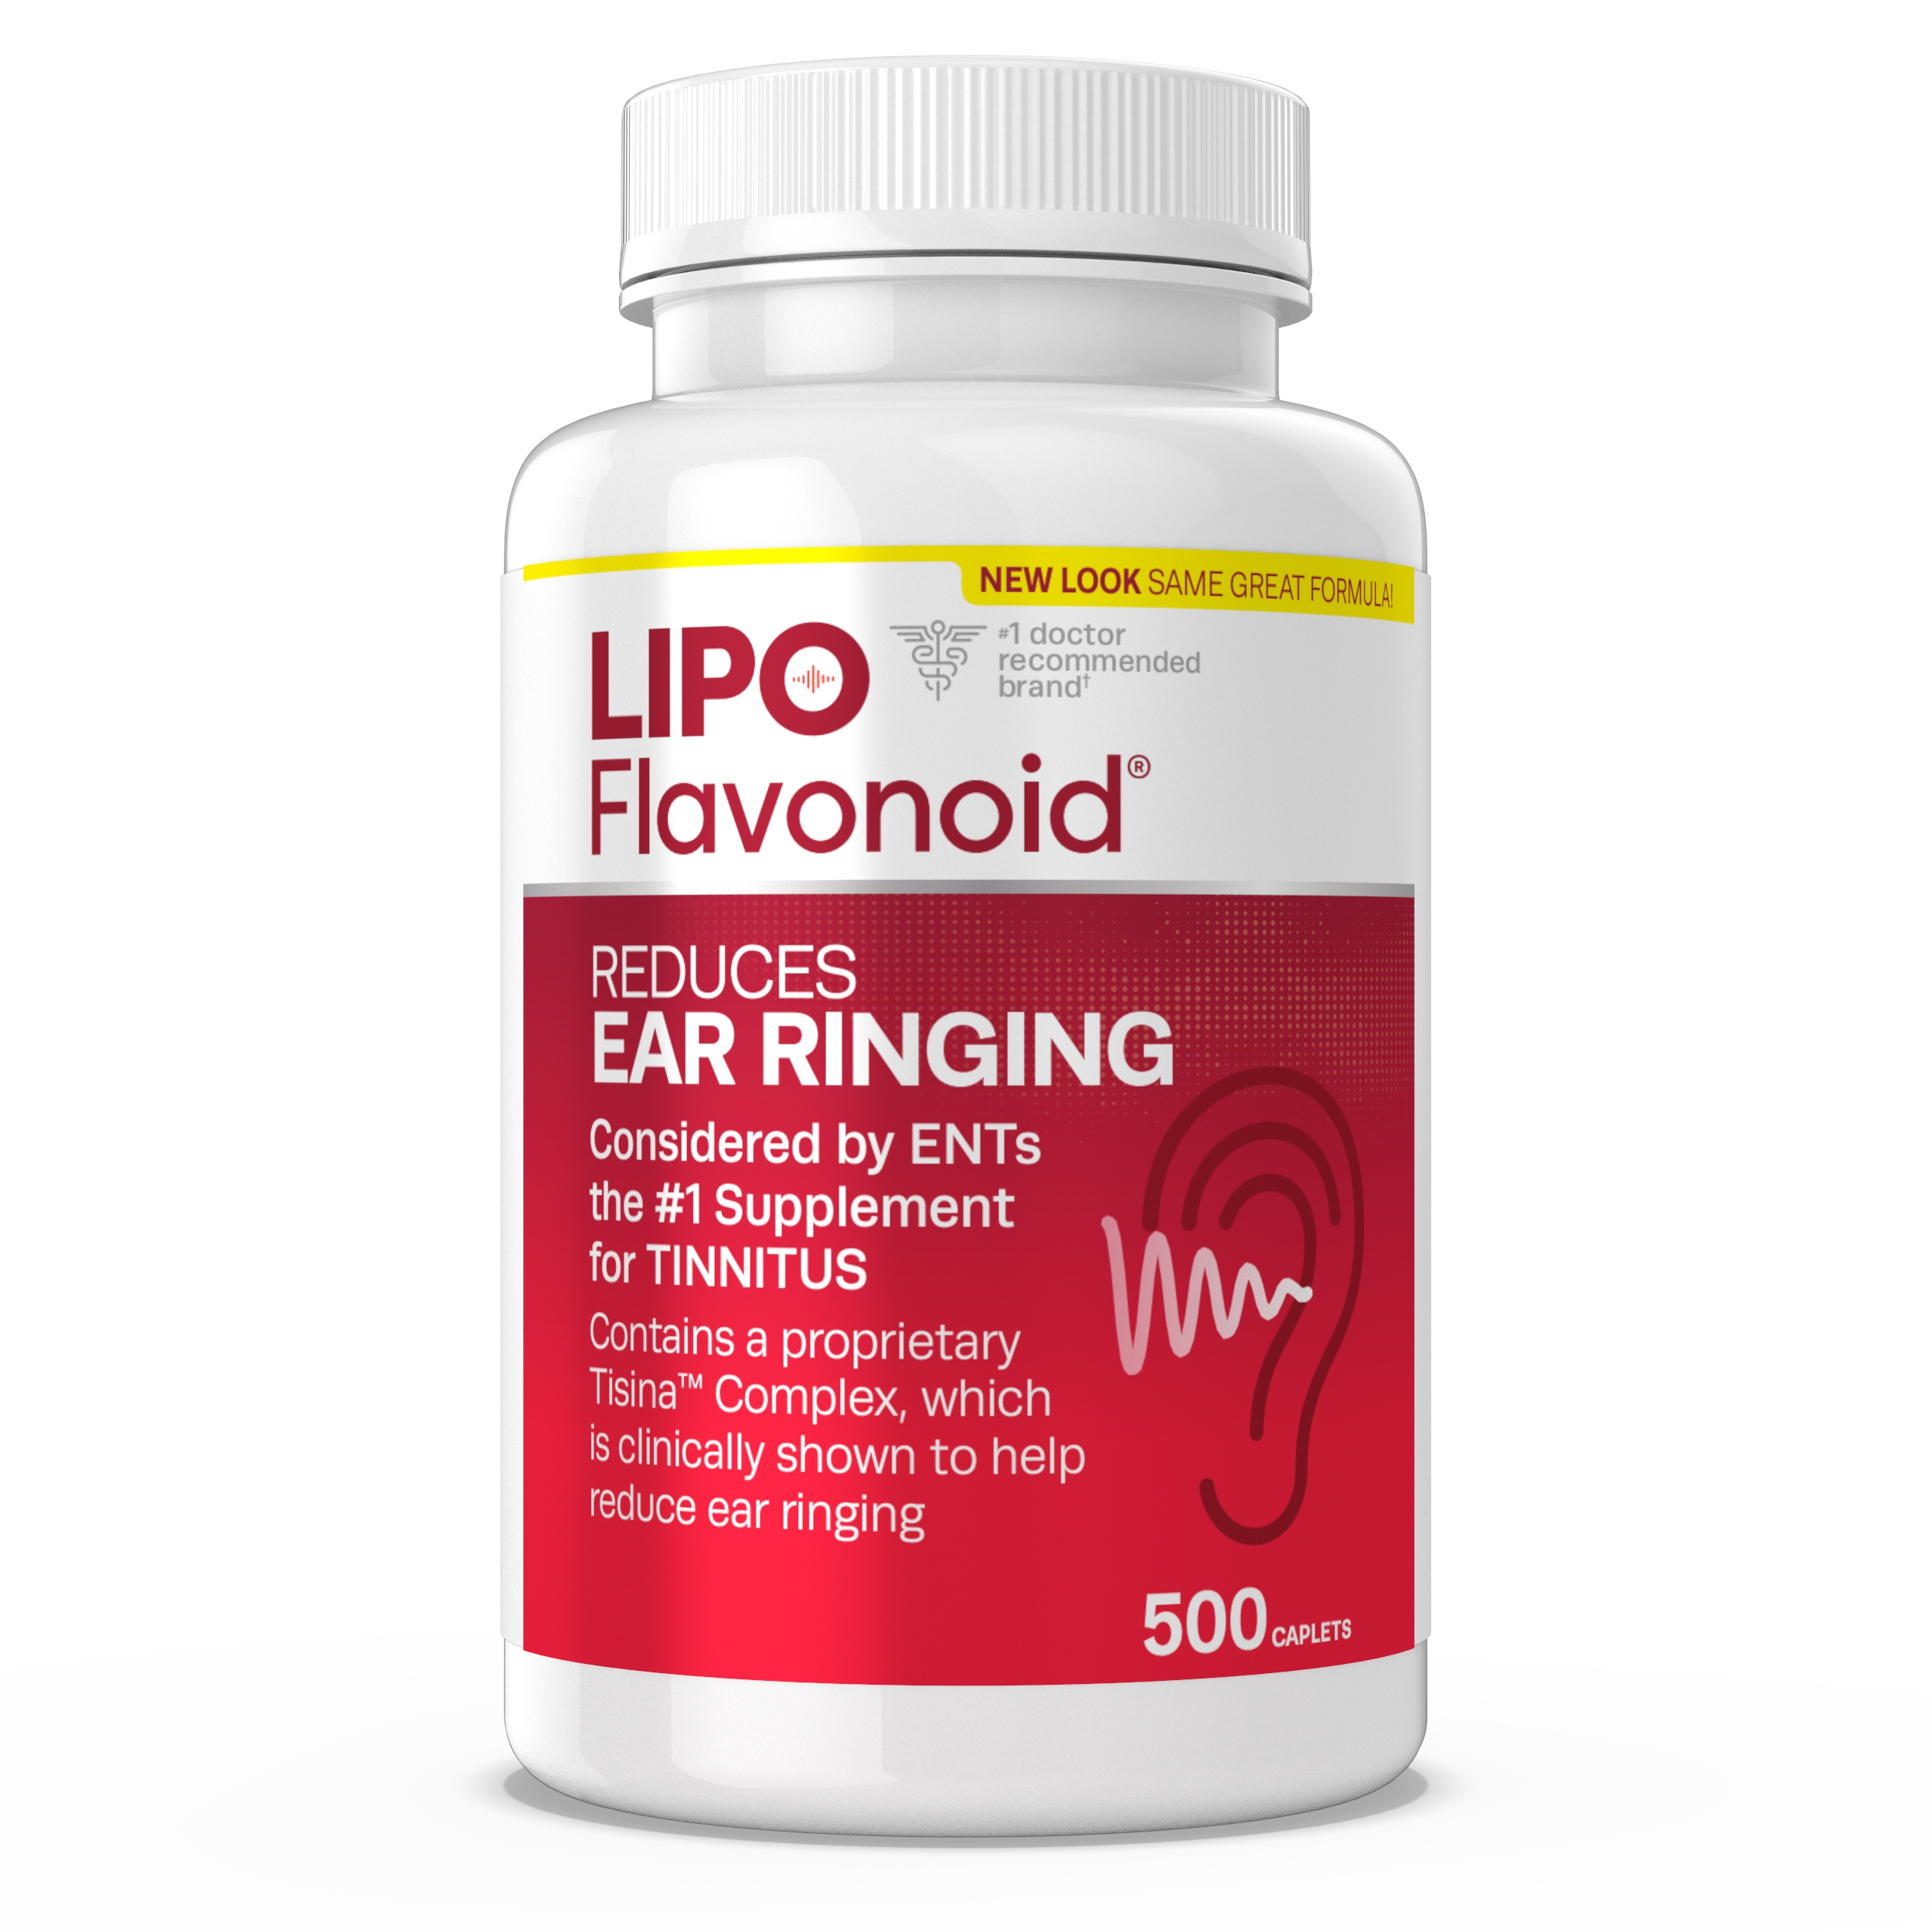 Lipo-Flavonoid Plus, Tinnitus Relief for Ear Ringing, Health Supplement, 500 Caplets, Value Size (Packaging May Vary) - image 3 of 12